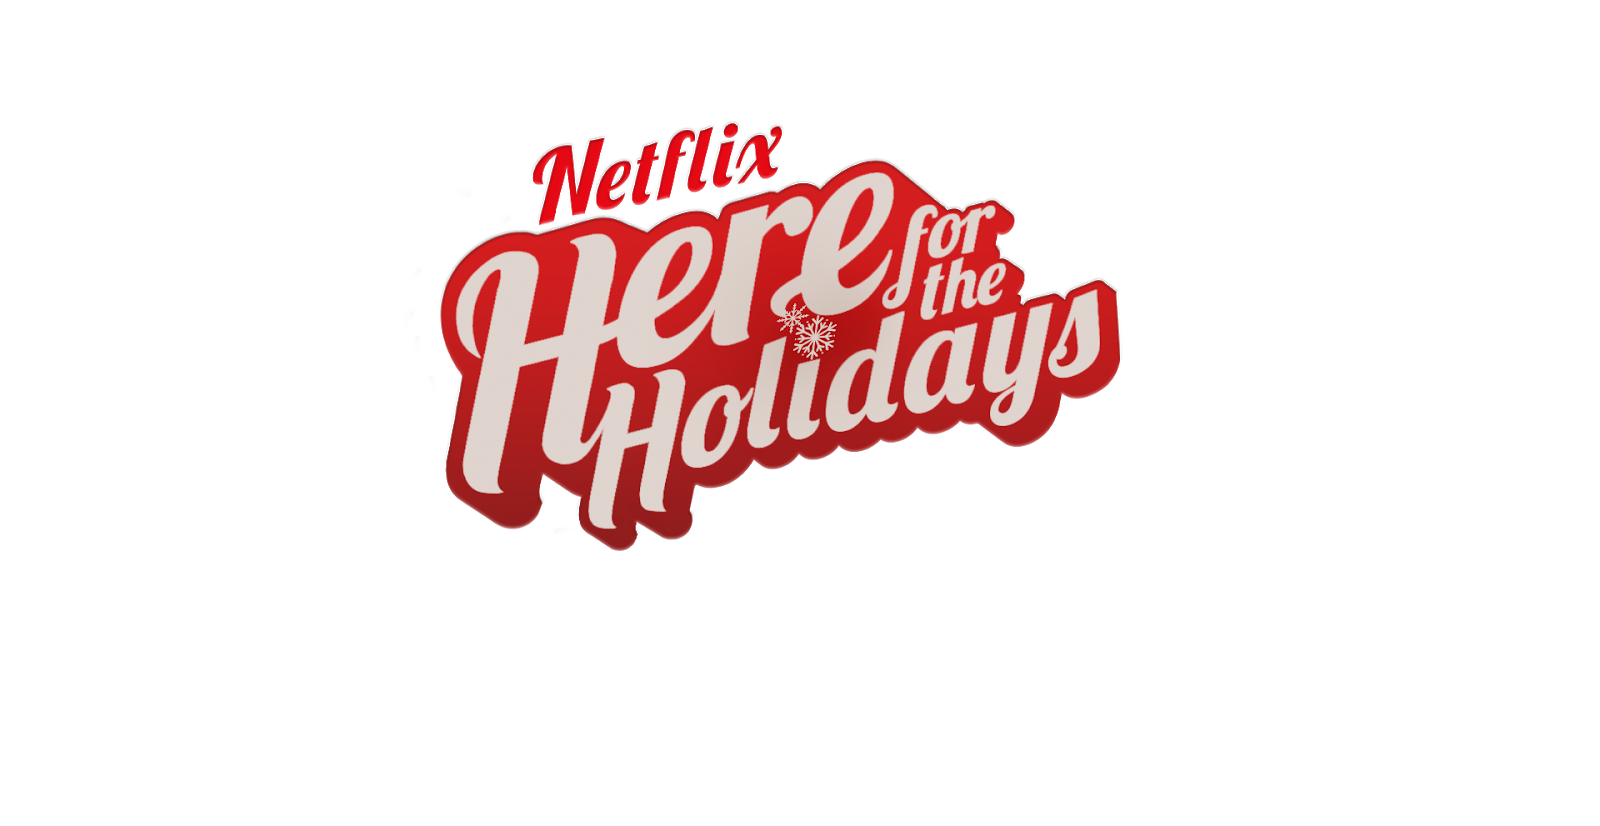 Netflix's Here for the Holidays lineup filled with seasonal joy